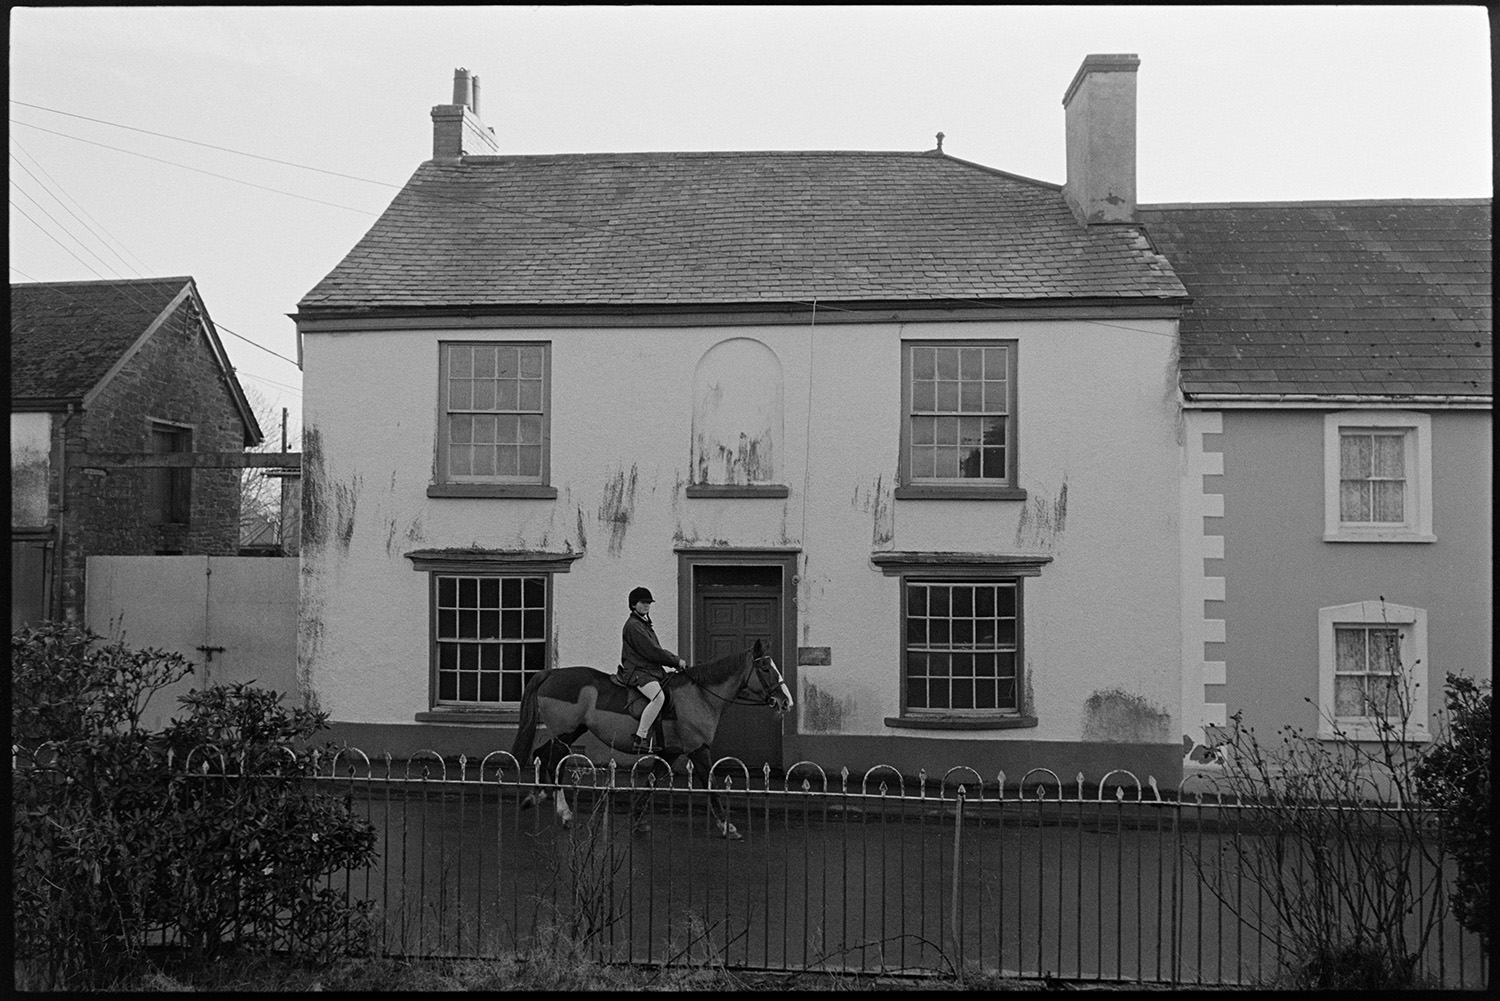 Street scenes. 
[A mounted horse rider, riding along a street in Chulmleigh past a house. Metal railings are visible in the foreground.]